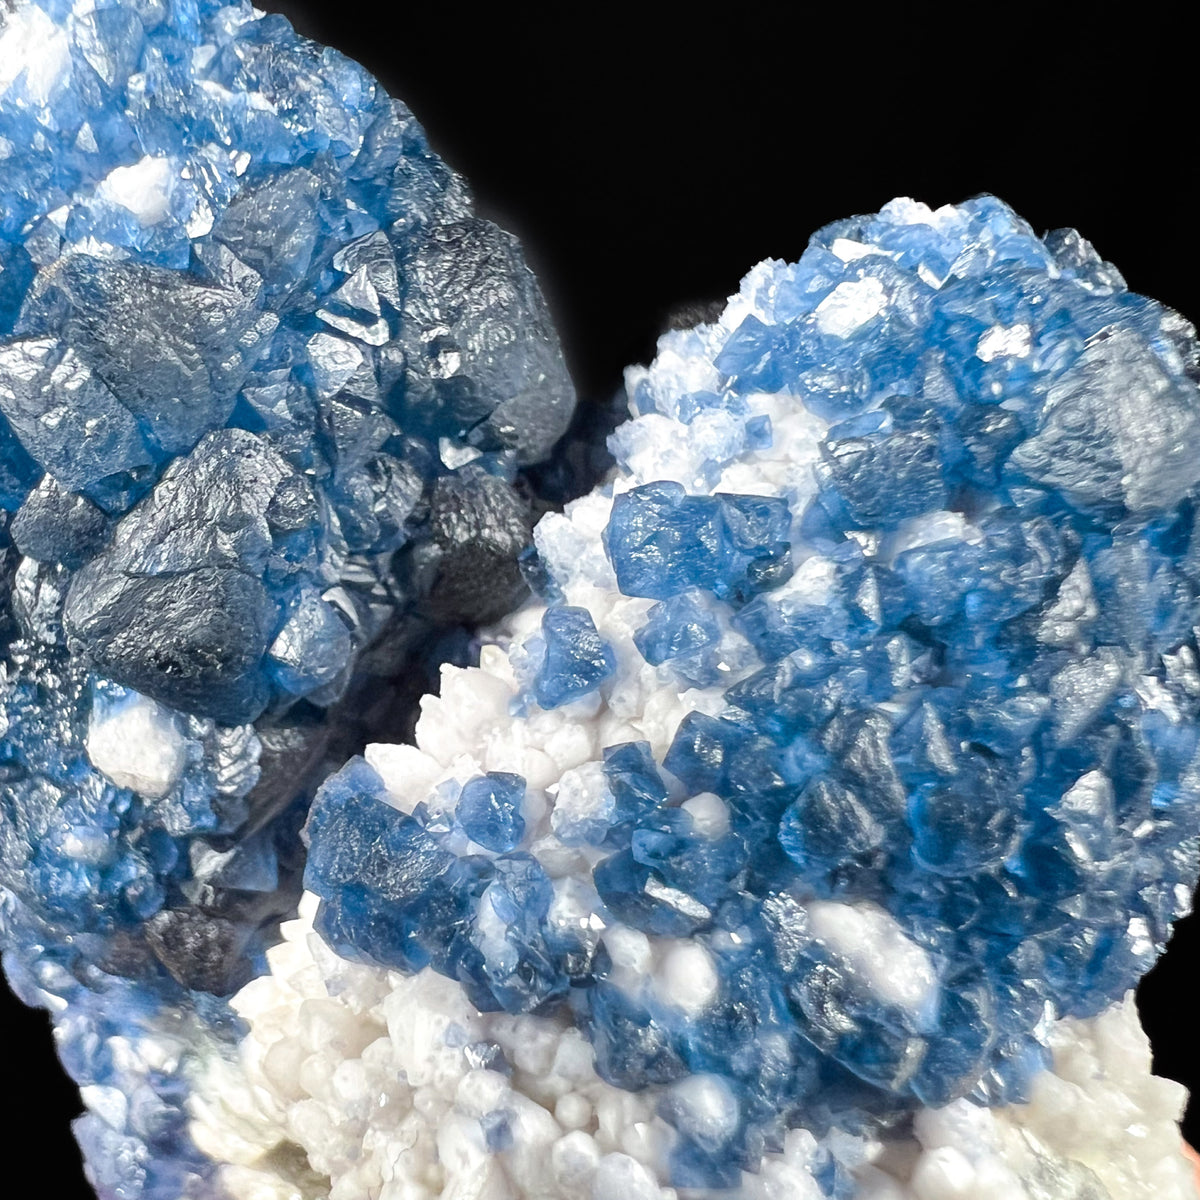 Close up of Blue Fluorite crystals with rhombododecahedron faces